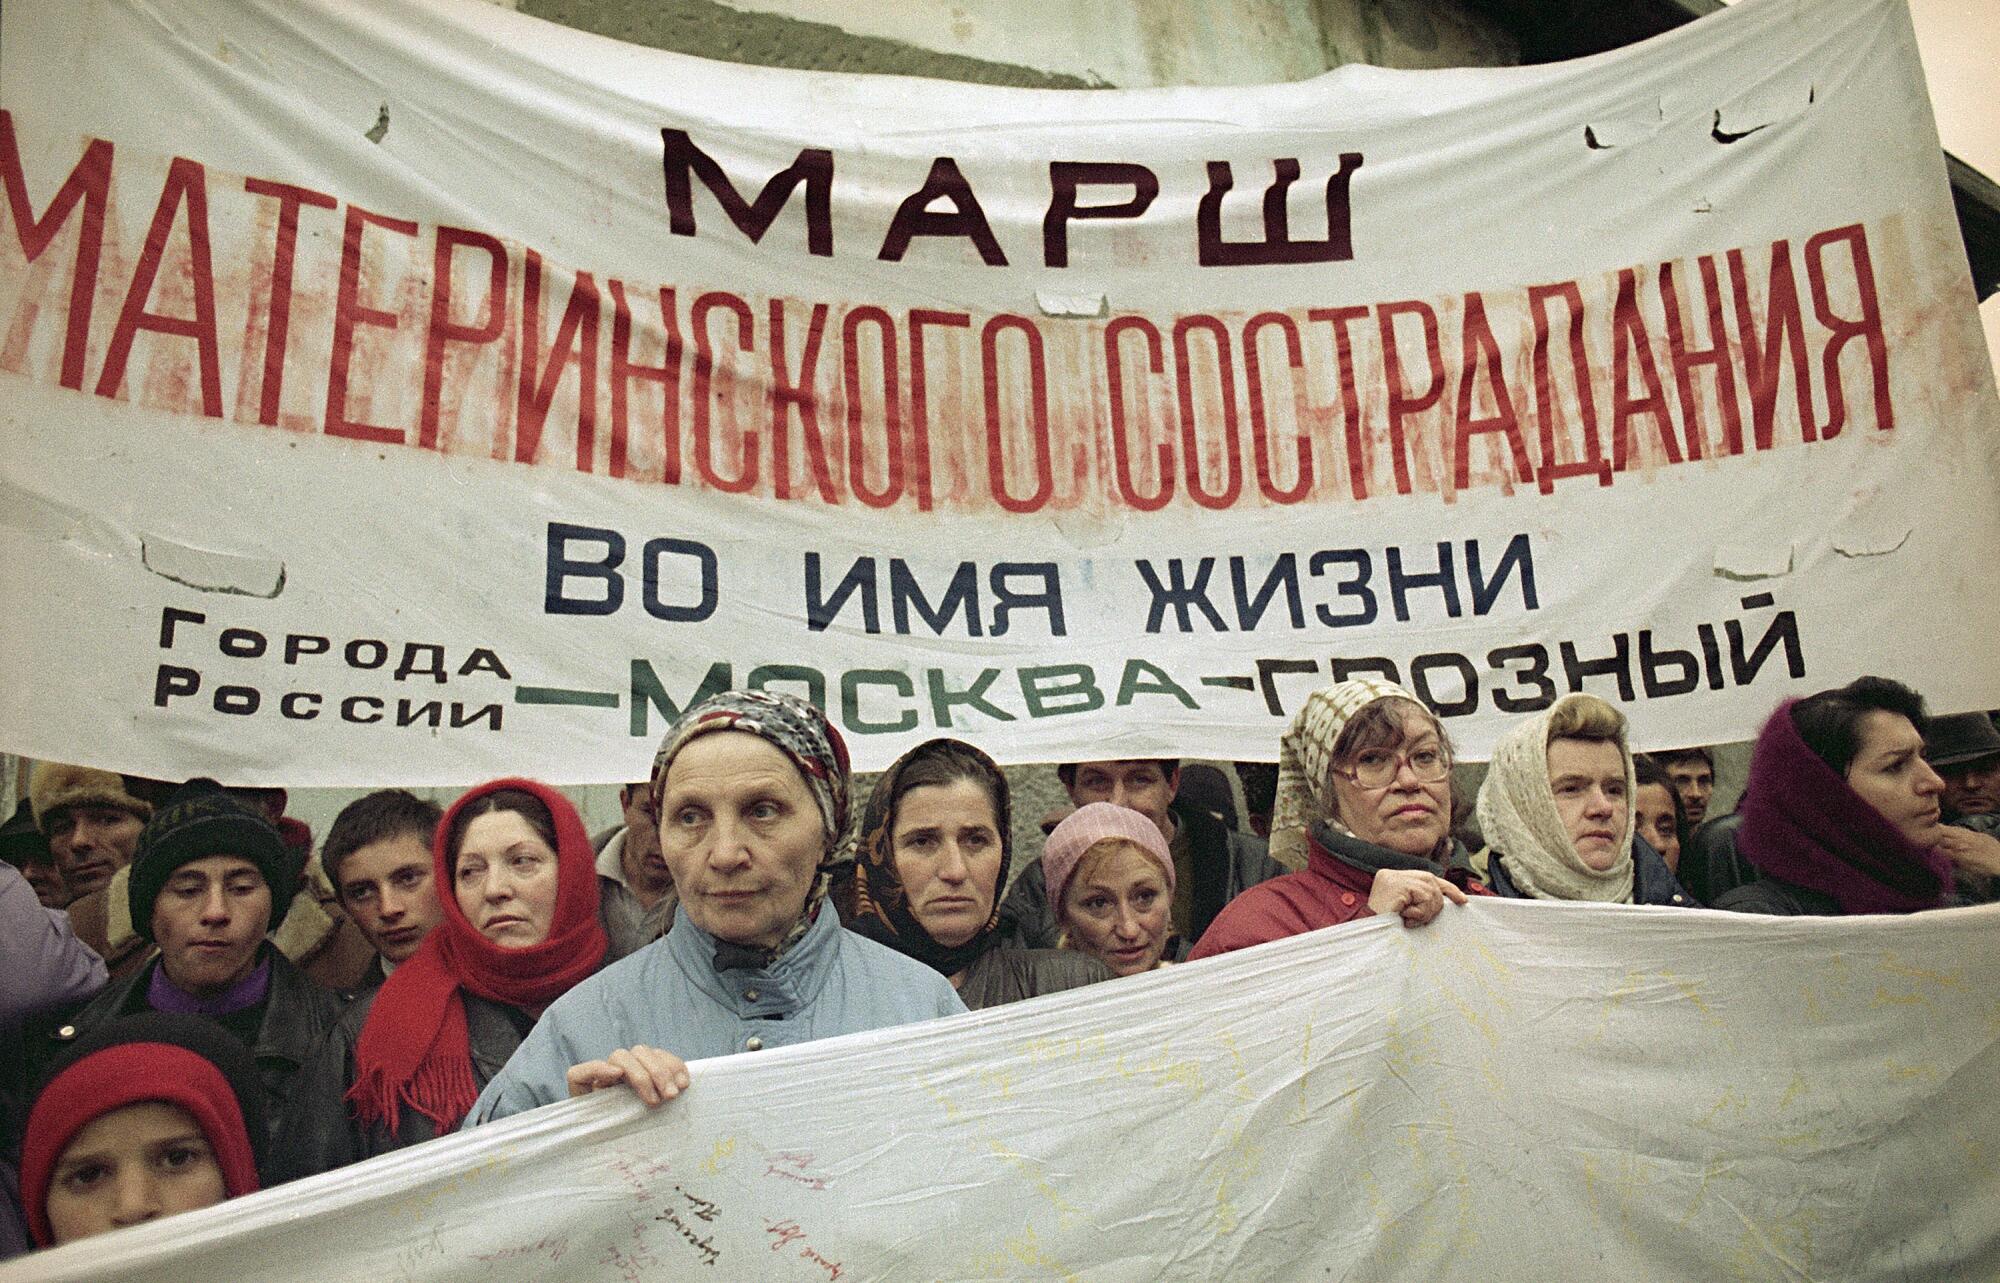 Mothers of Russian soldiers carry a protest banner in 1995. The banner says: "The March of Mothers' Compassion." 